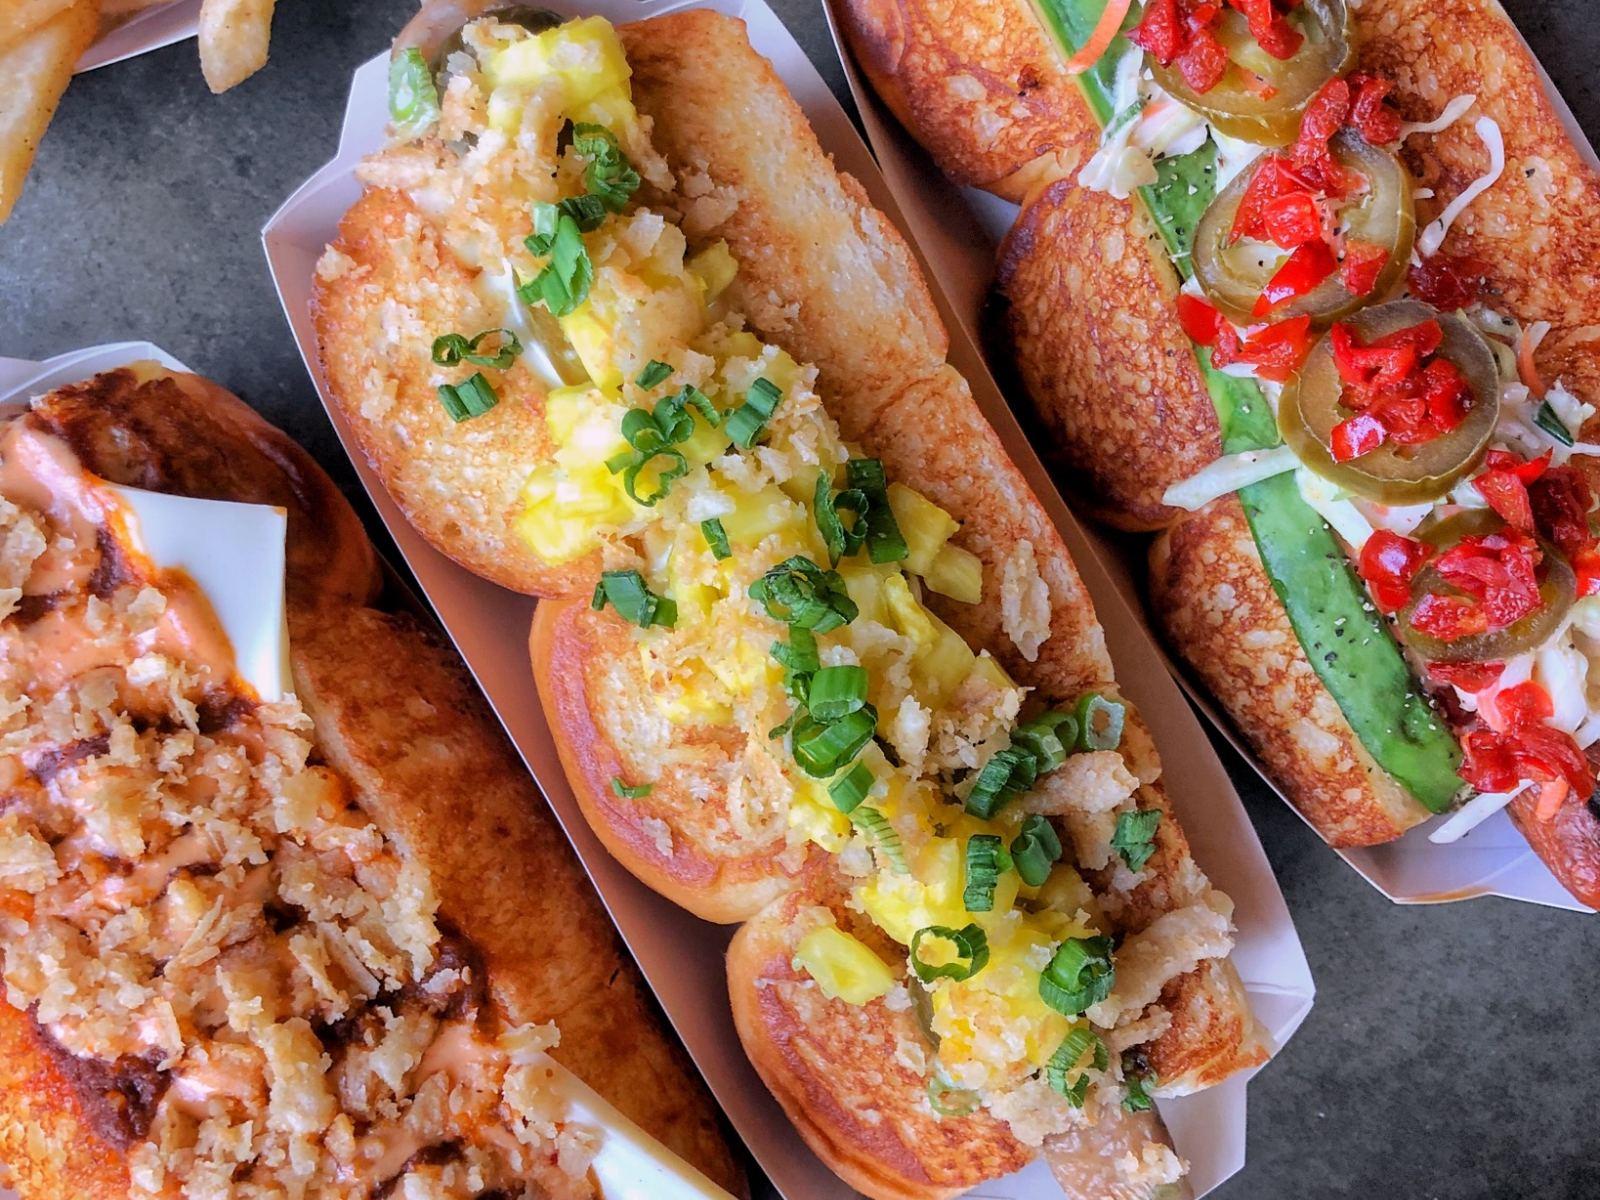 Celebrate National Hot Dog Day with FREE Hot Dogs from Dog Haus